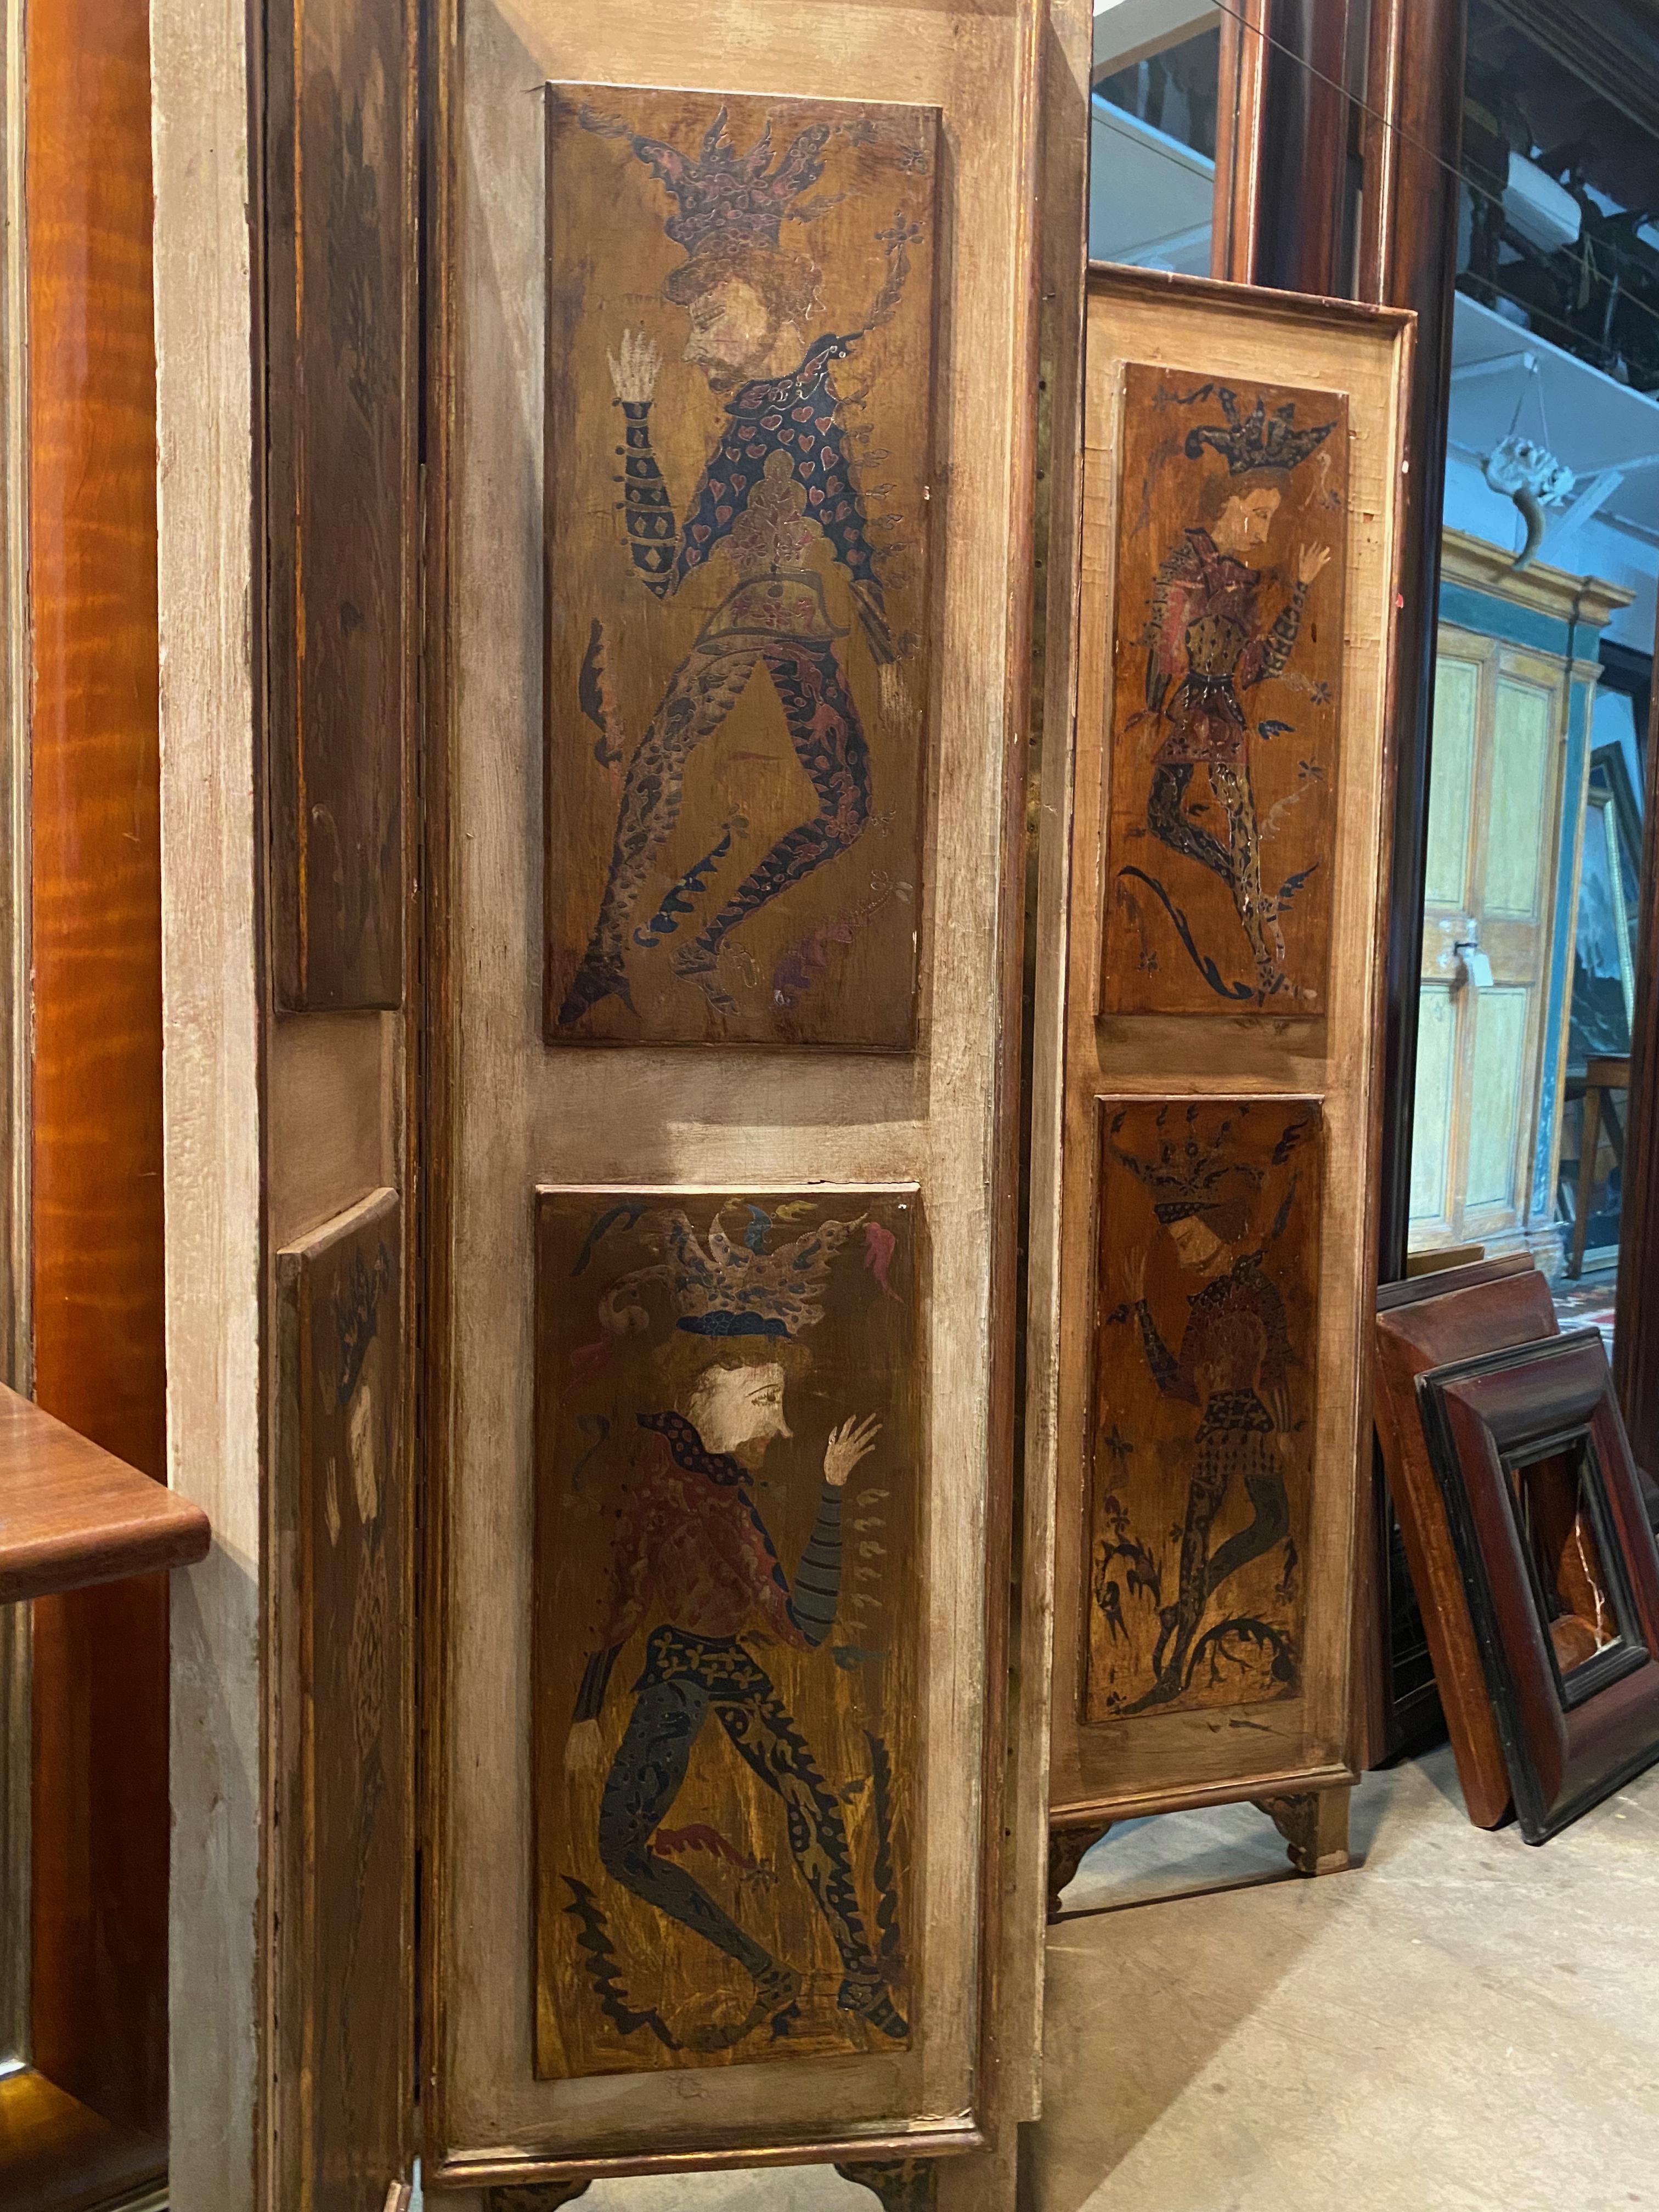 This Italian wooden folding screen from the 19th century is a true marvel of craftsmanship and artistry. Standing at 63